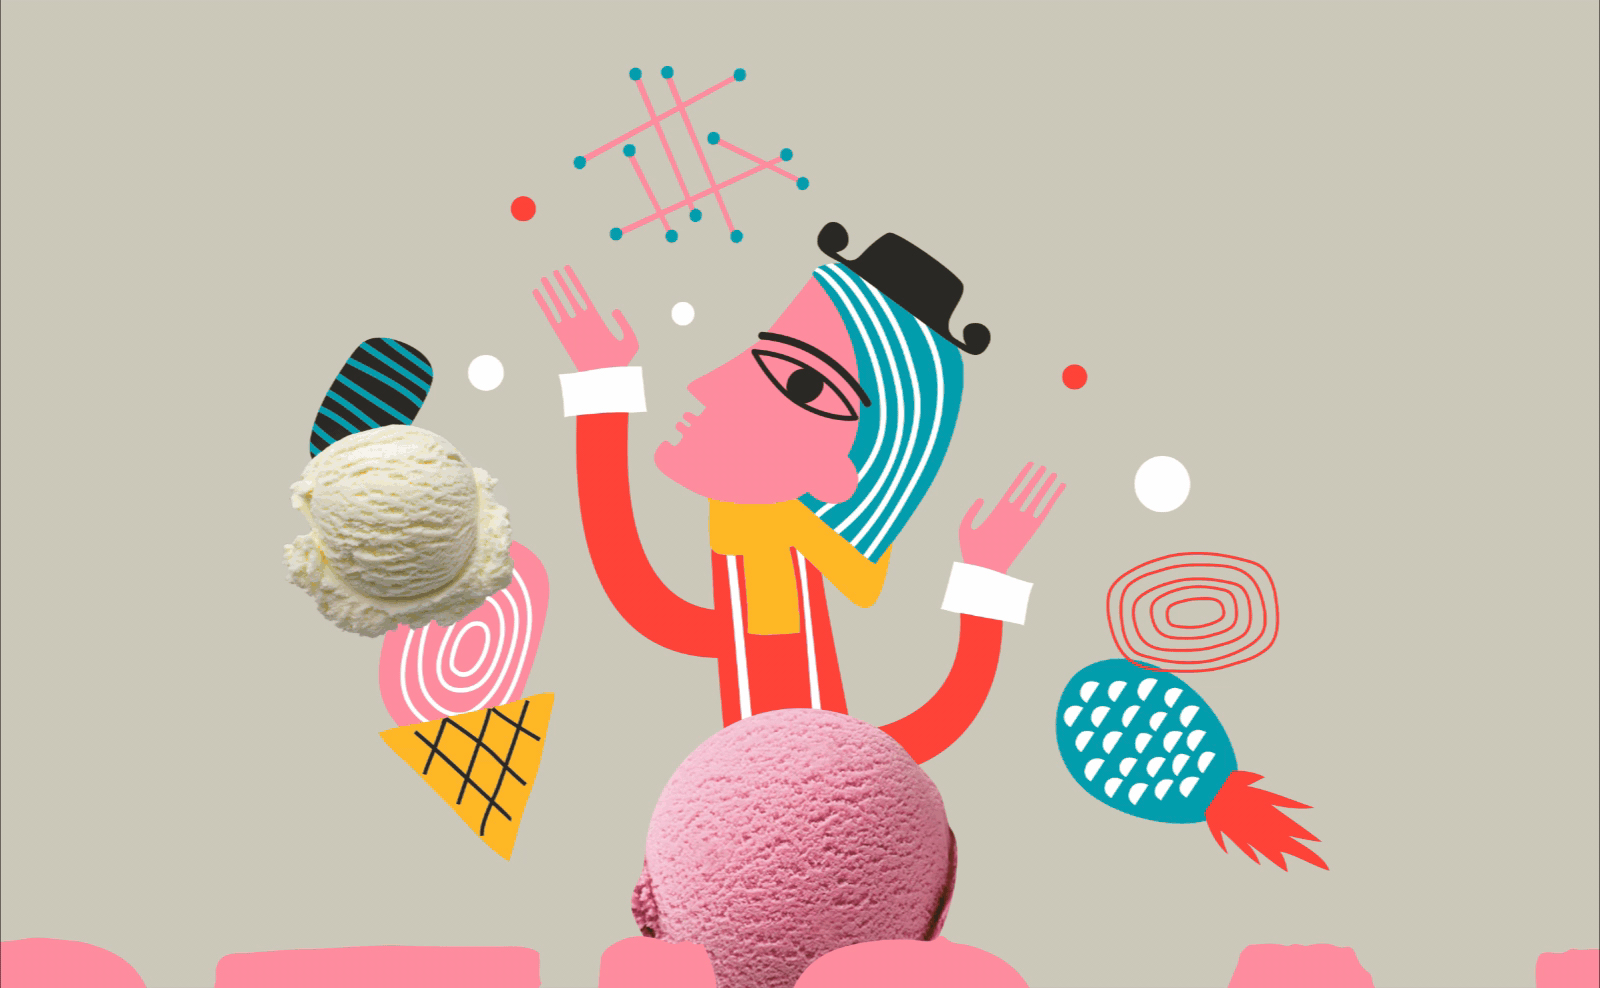 Polkadot Help Piet’s Playful Brand Design Celebrates the Artistry of Flavor in Ice Cream Making